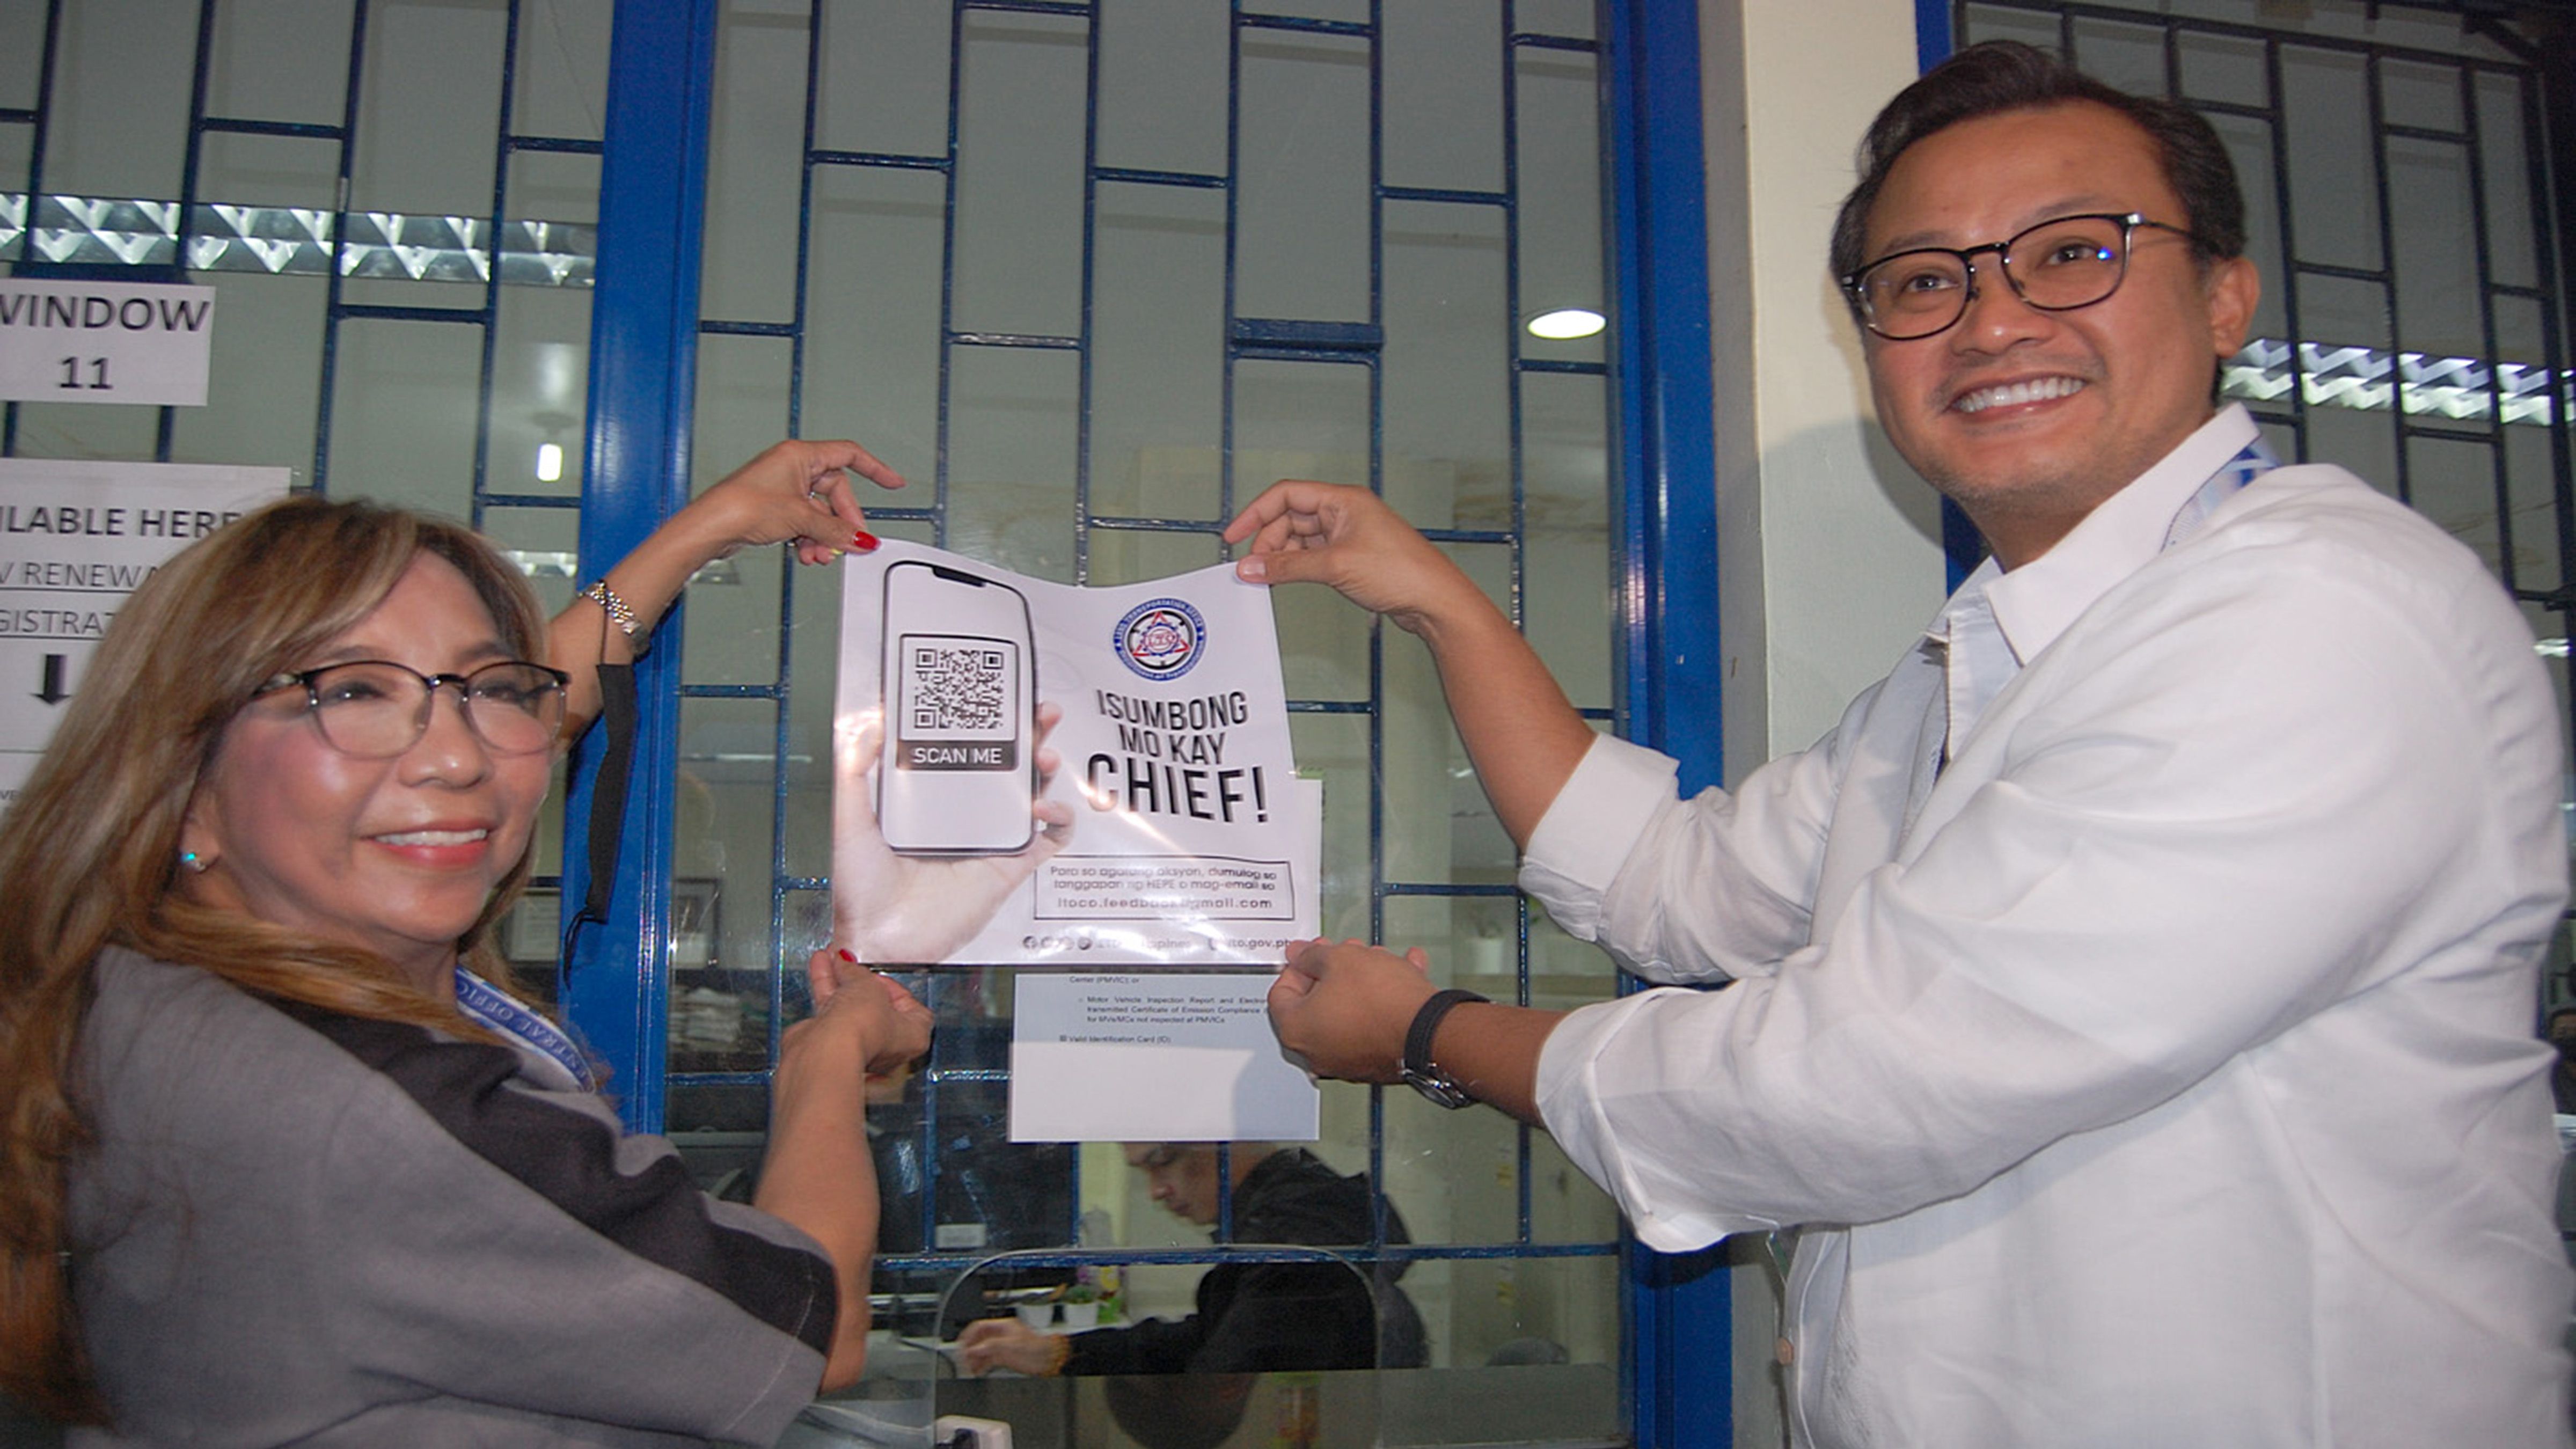 'ISUMBONG MO KAY CHIEF QR CODE LAUNCHED Art Torres